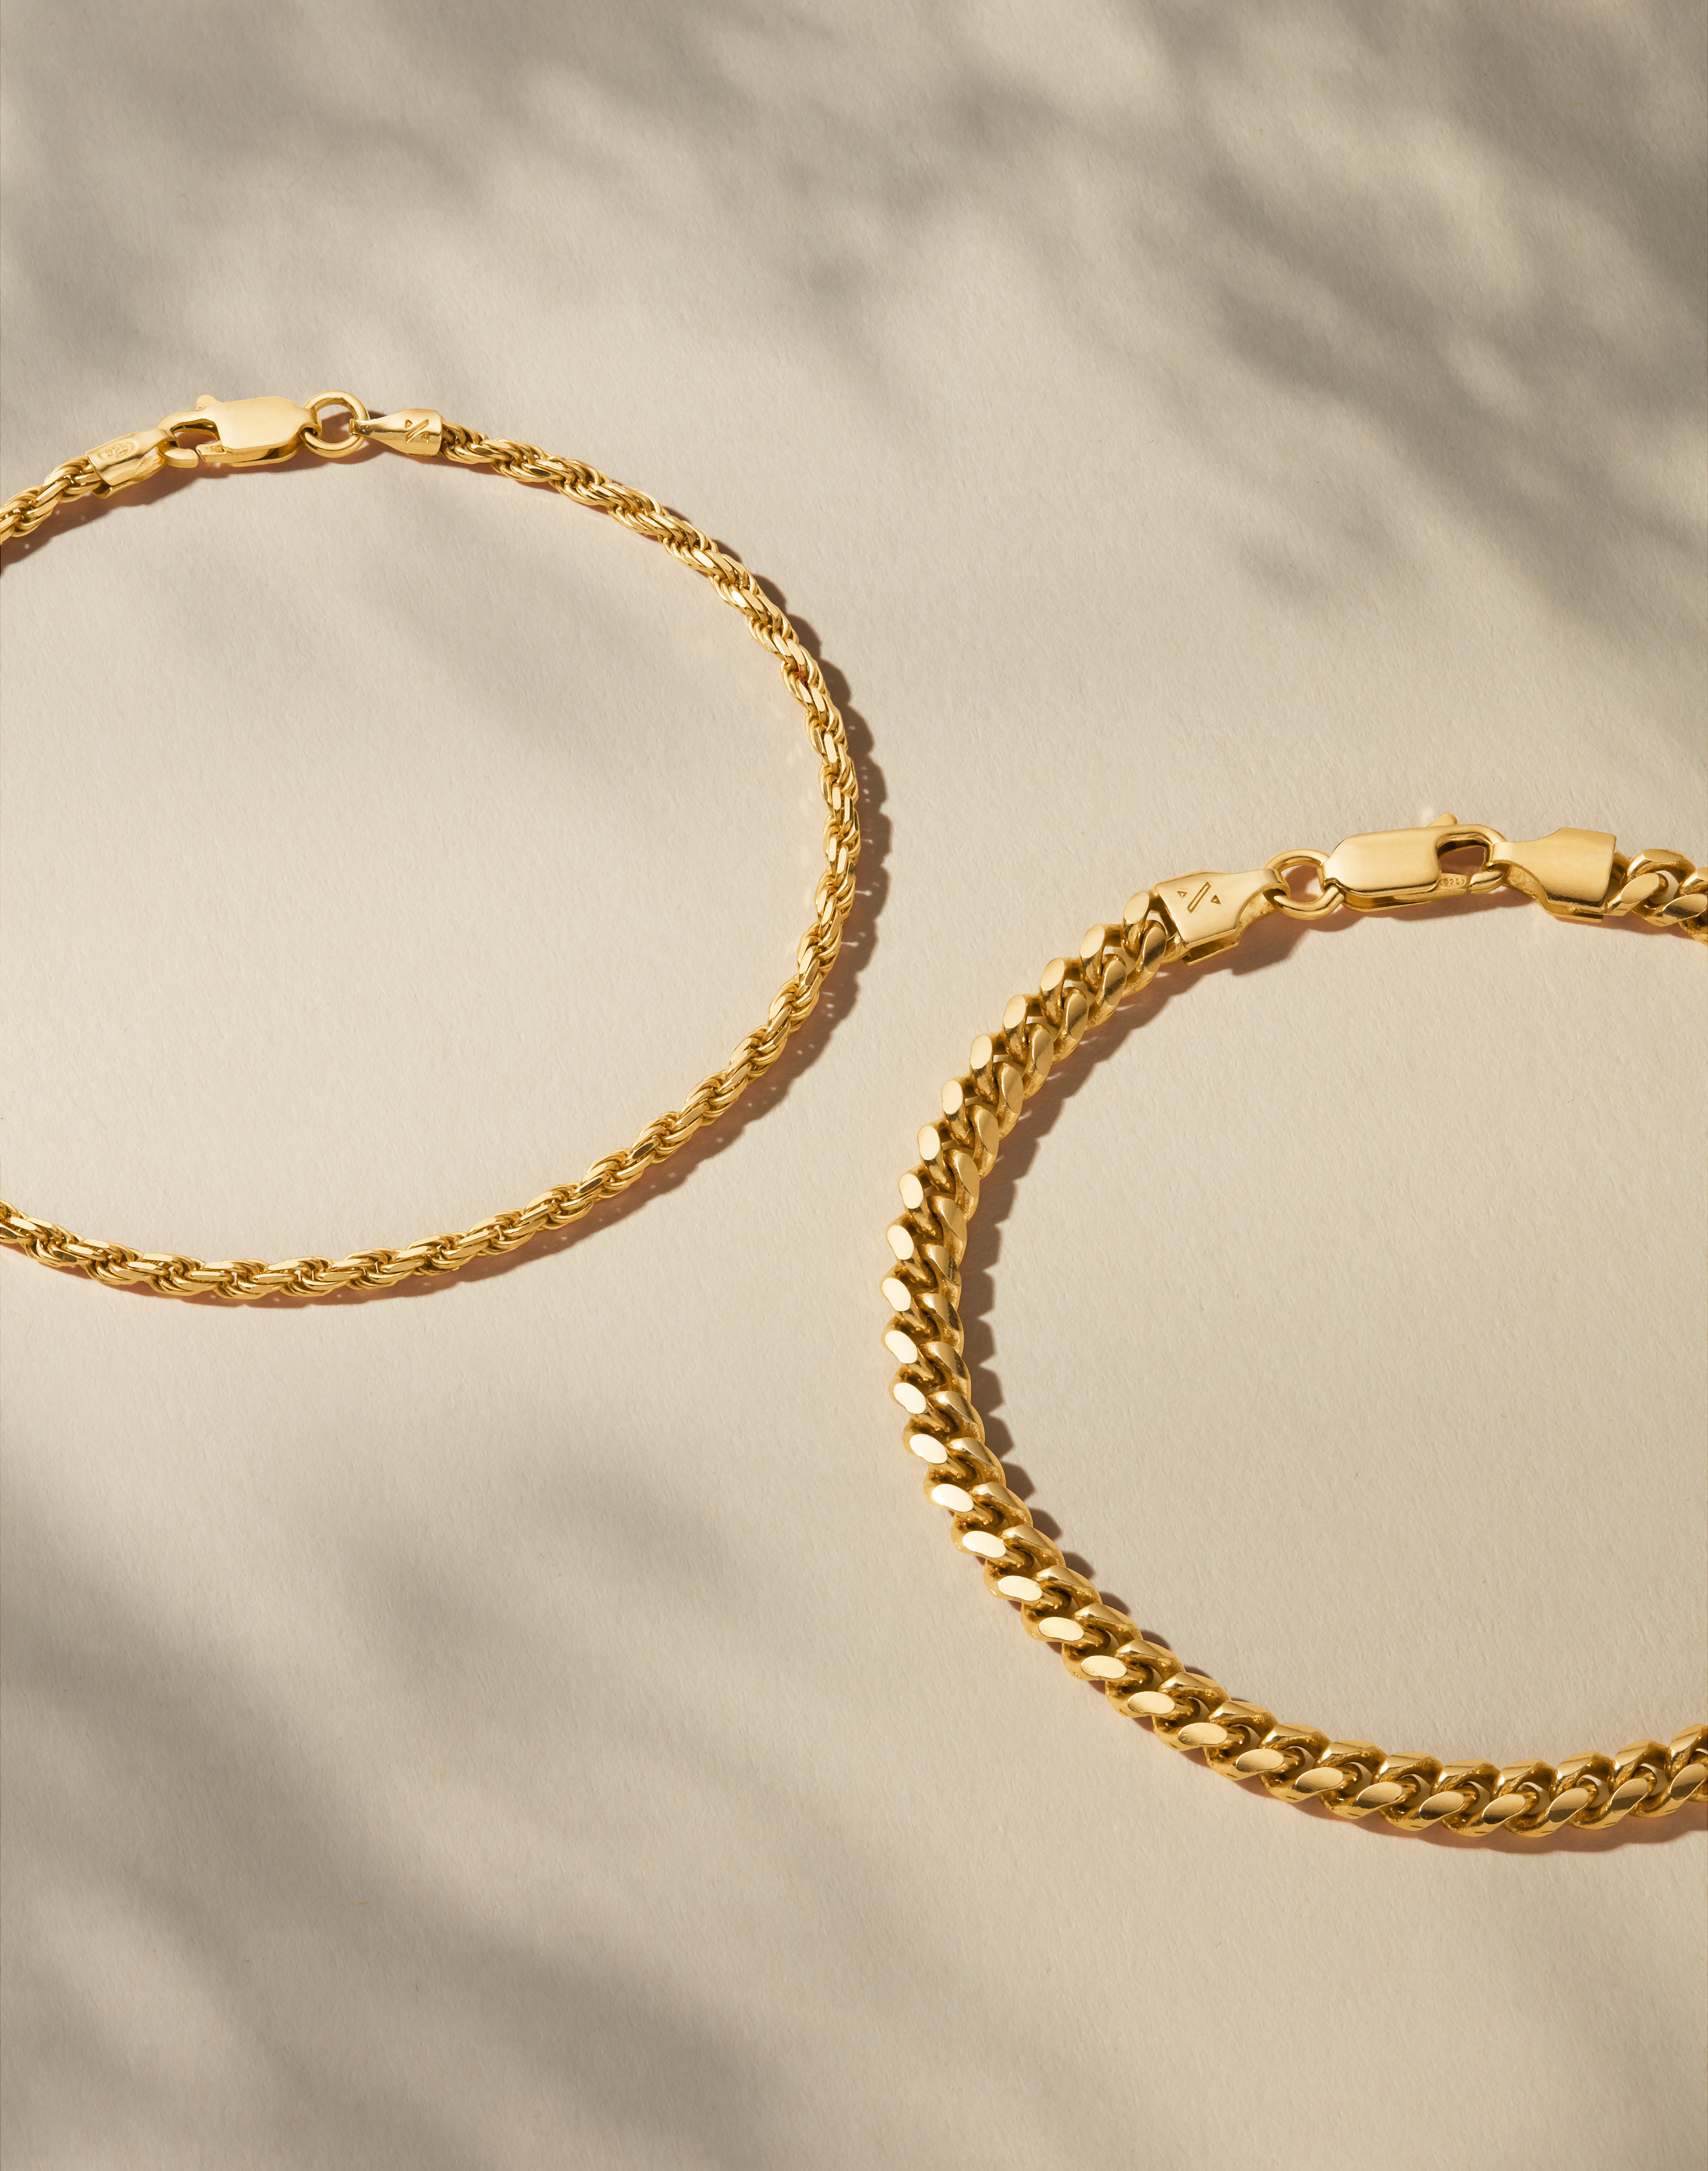 Image Cuban + Rope Bracelet Stack - Gold - Made With Precious Metals